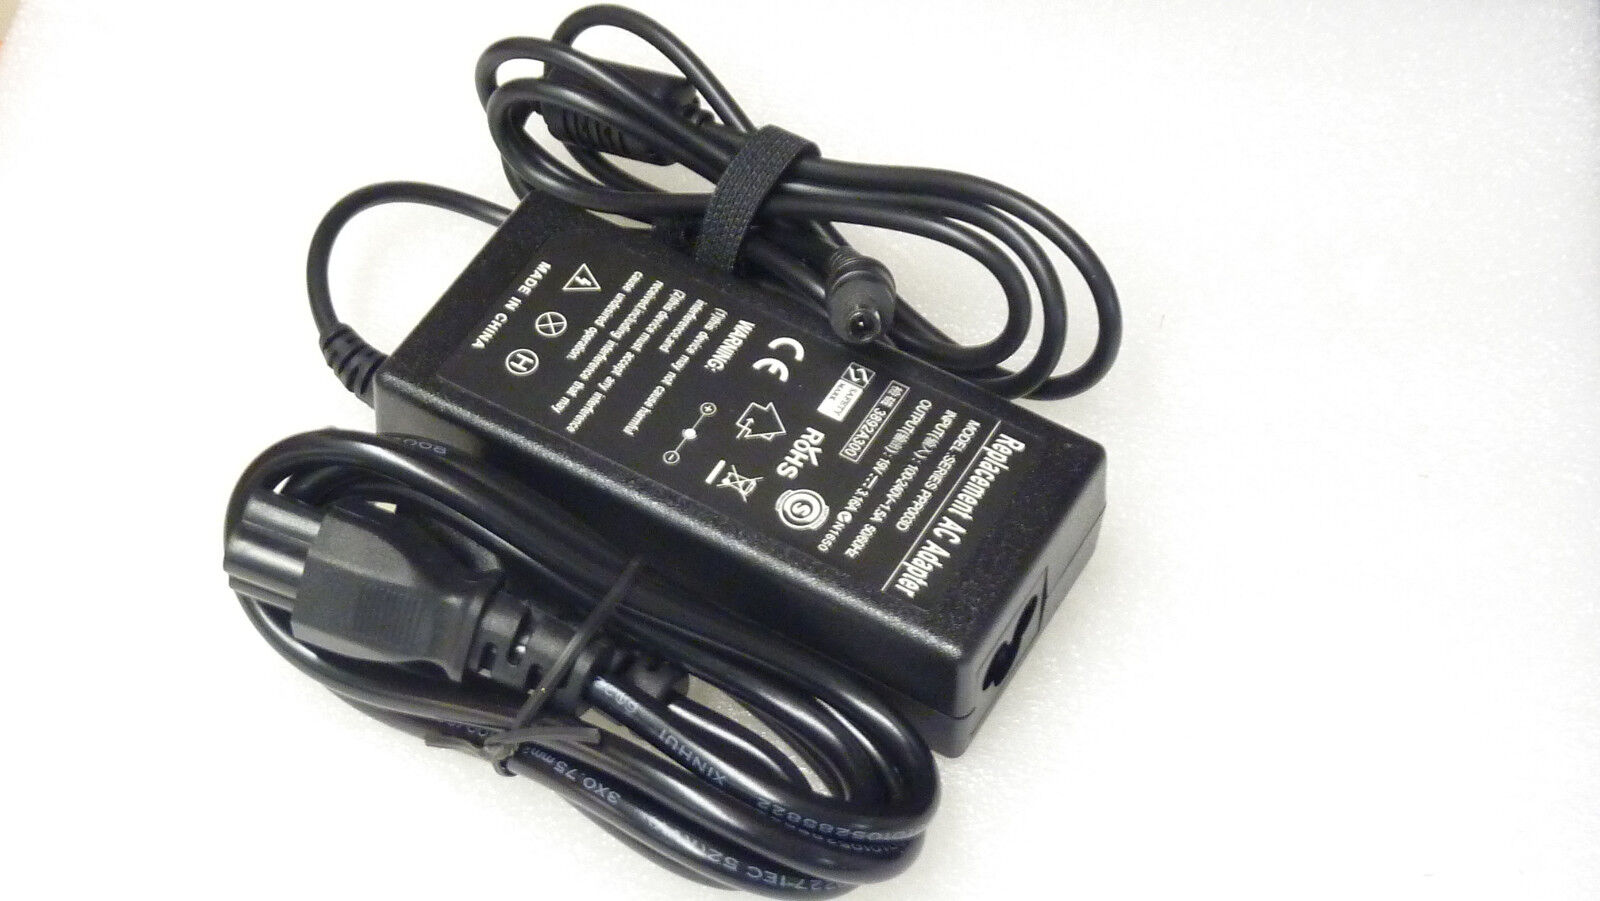 AC Adapter Cord Charger For Samsung NP-Q330-JA01US NP200A5B-A03US NP200A5B-A02US